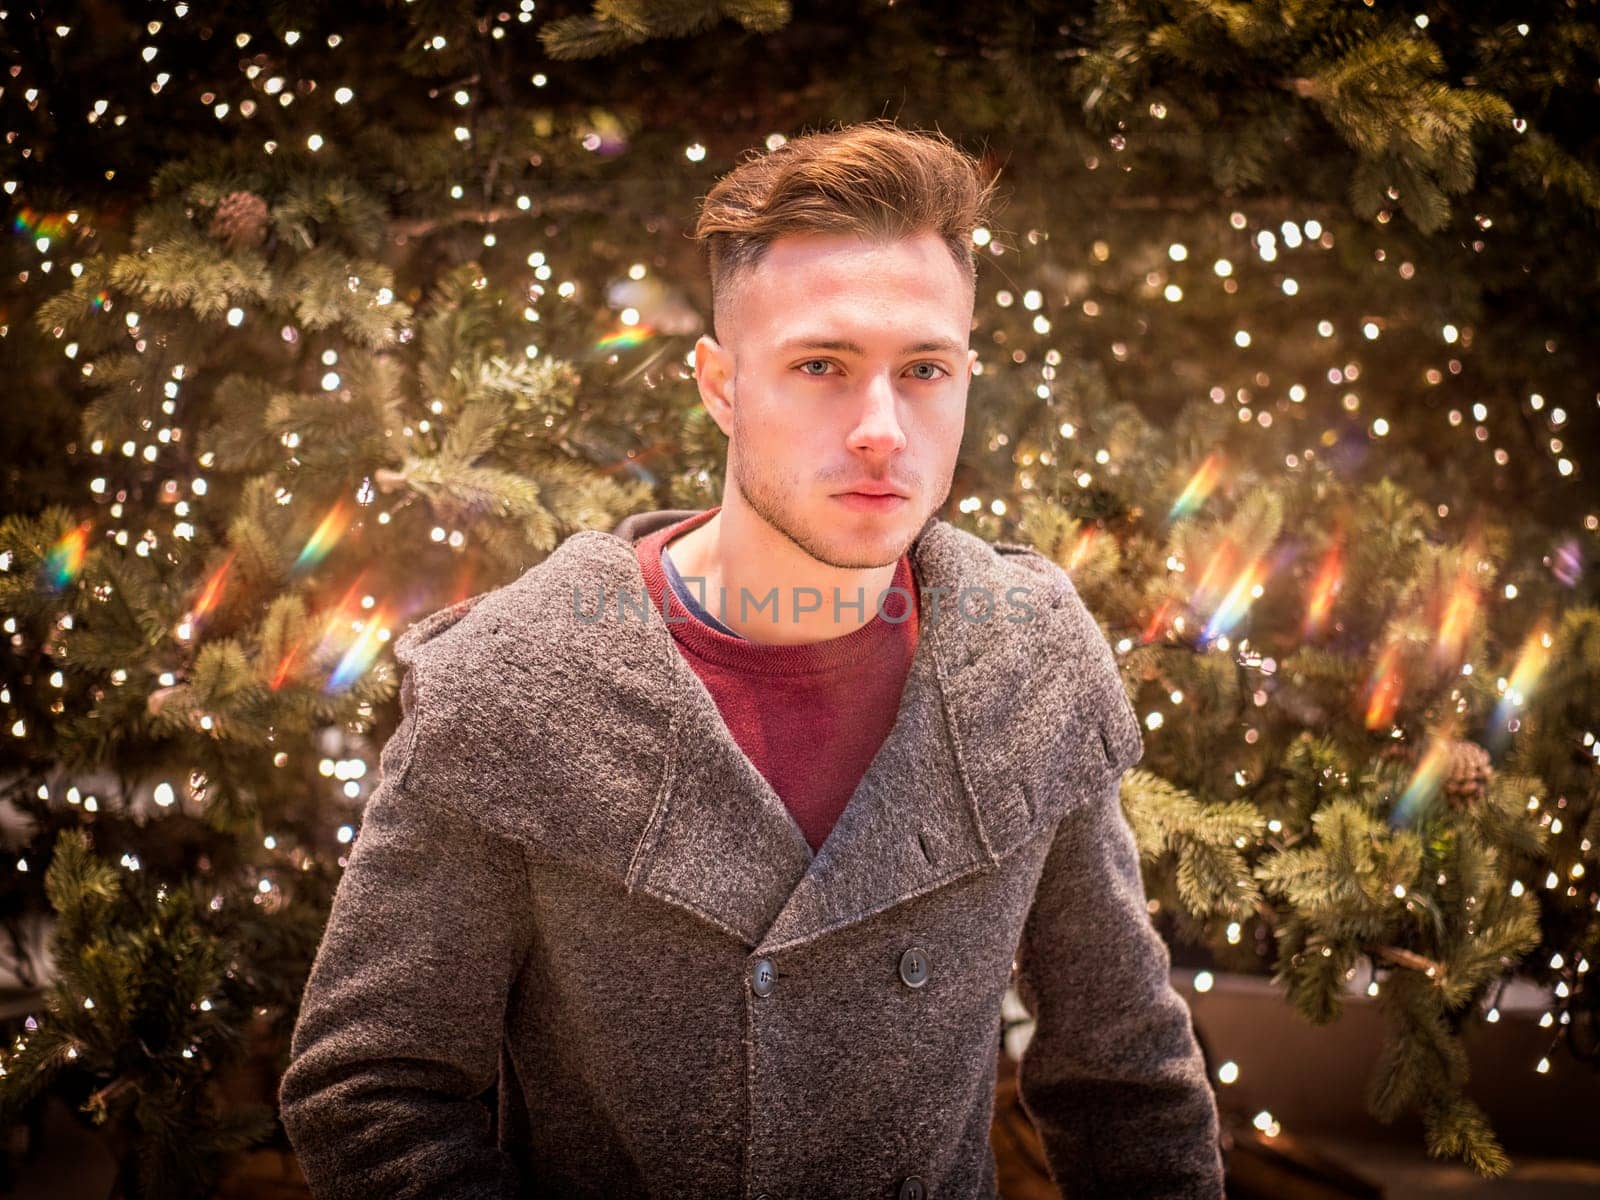 Photo of a man standing in front of a beautifully decorated Christmas tree by artofphoto